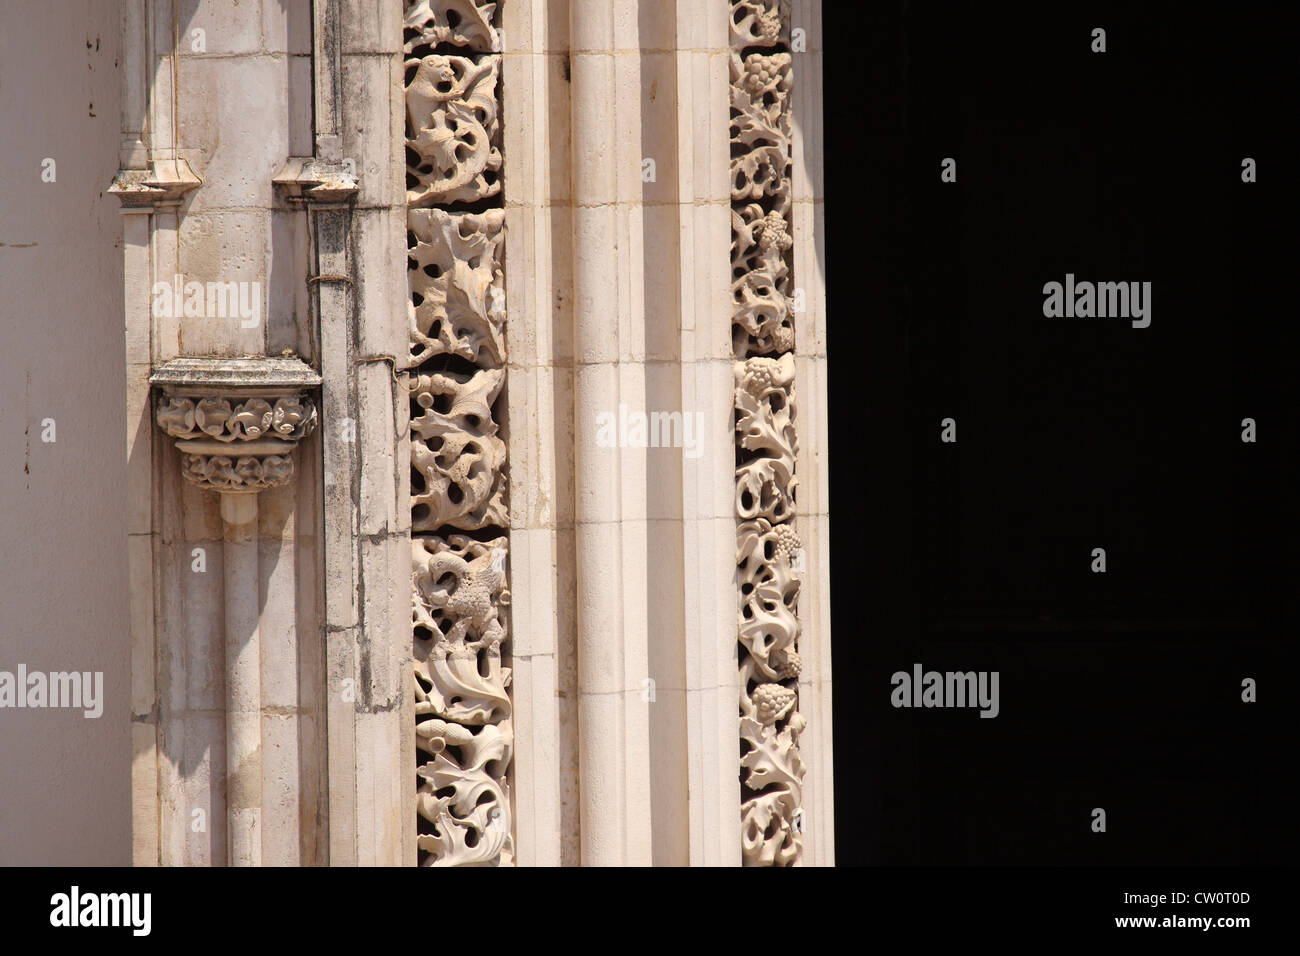 Ascanthus carvings on the Manueline style door of the St John the Baptist church in Tomar, Portugal. Stock Photo